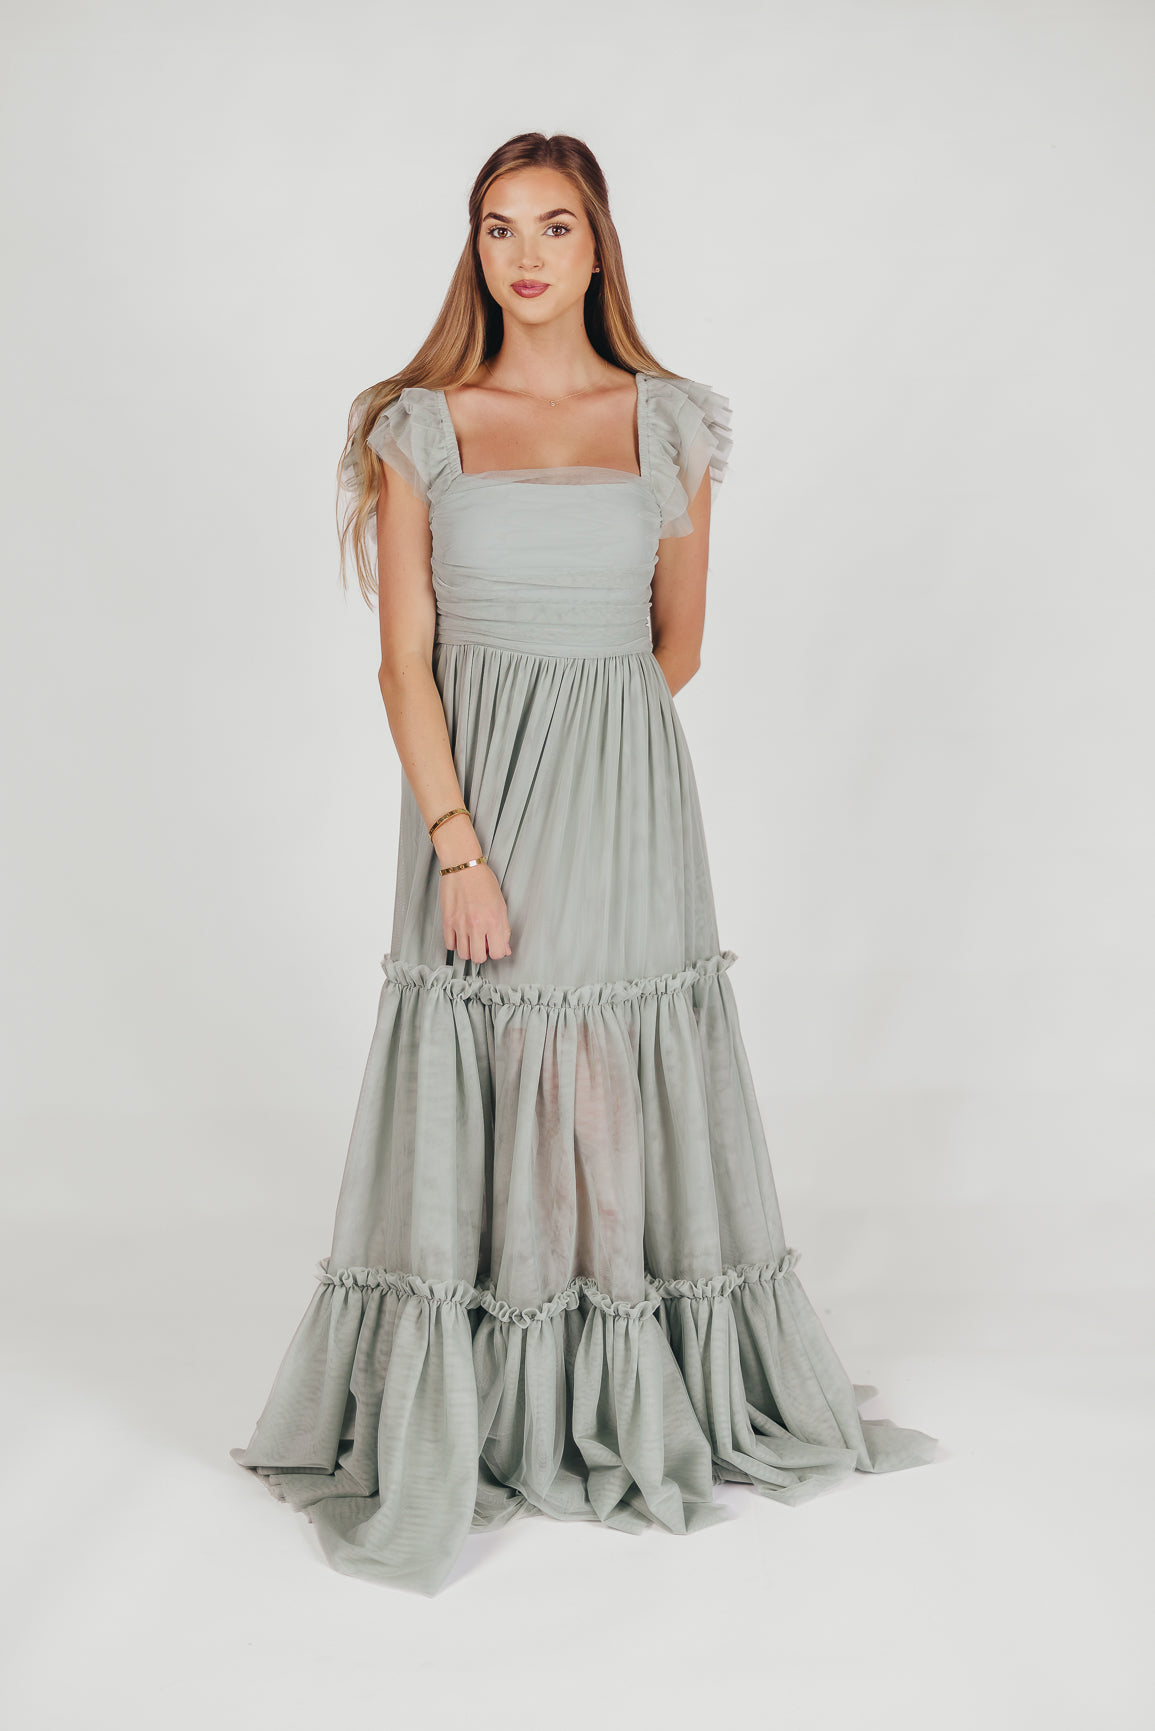 Bella Tiered Tulle Maxi Dress in Sage - Bump Friendly & Inclusive Sizing (S-3XL) Restocking End of Aug